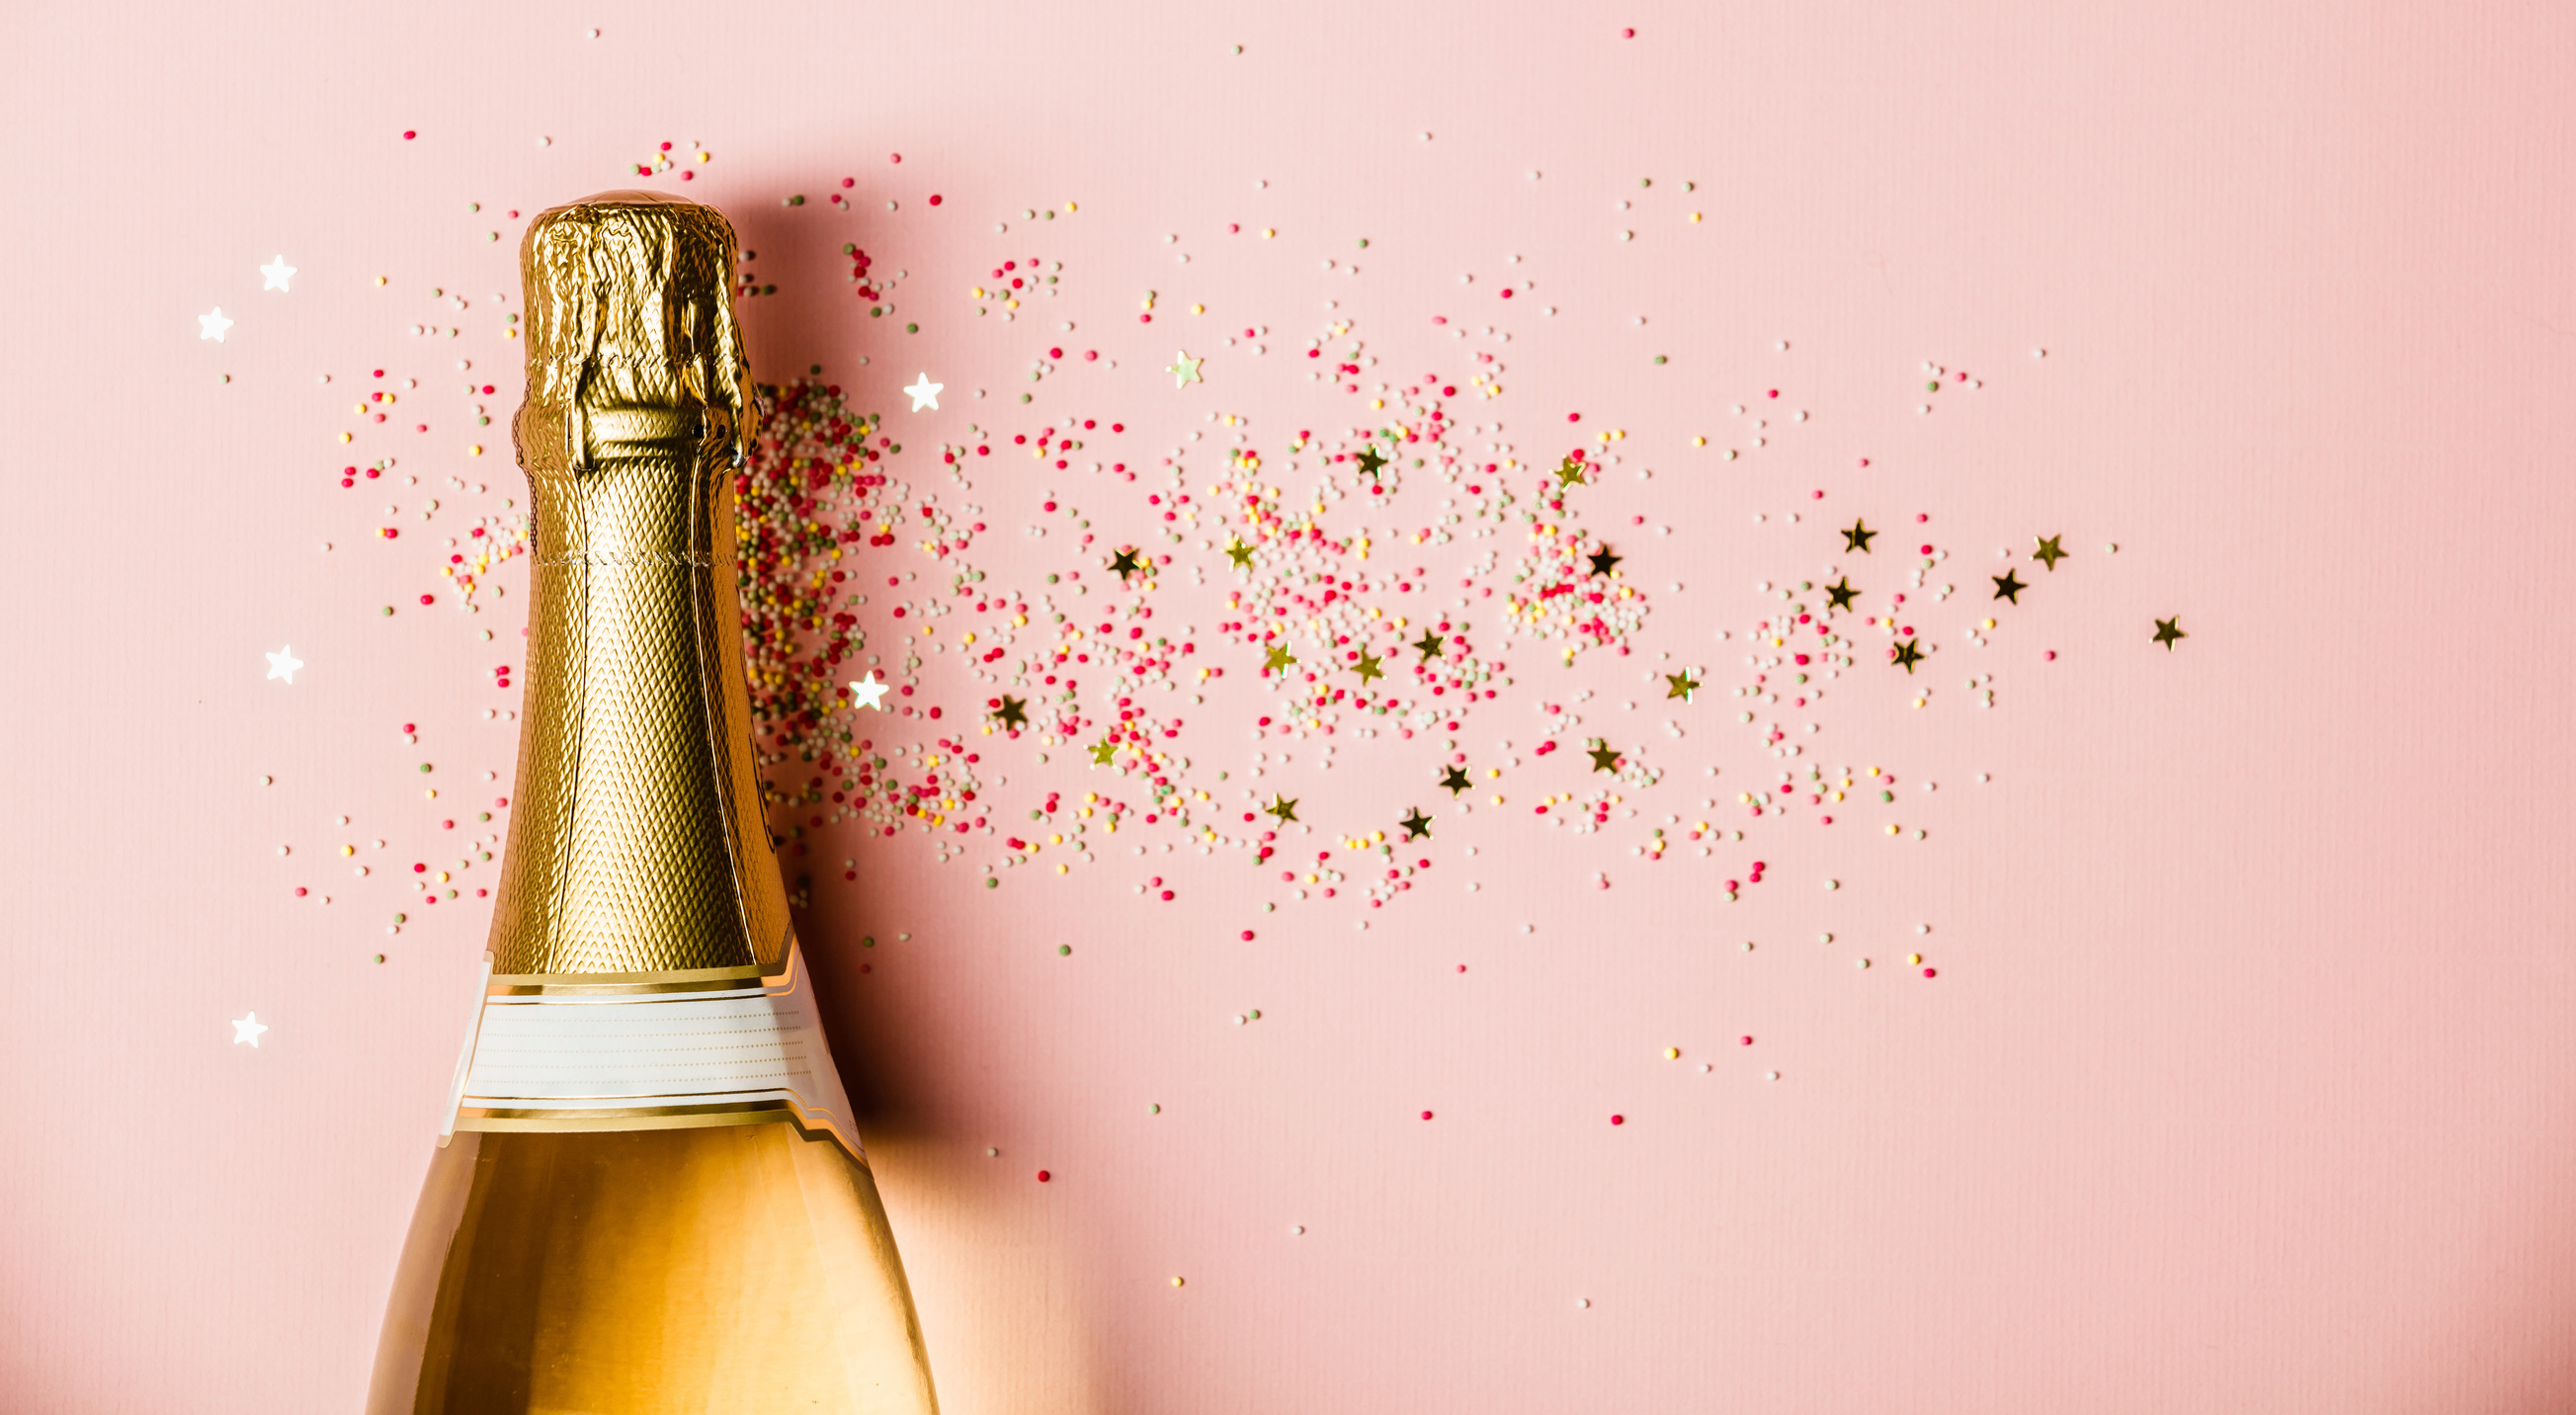 Champagne Bottle with Sprinkles on Pink Background